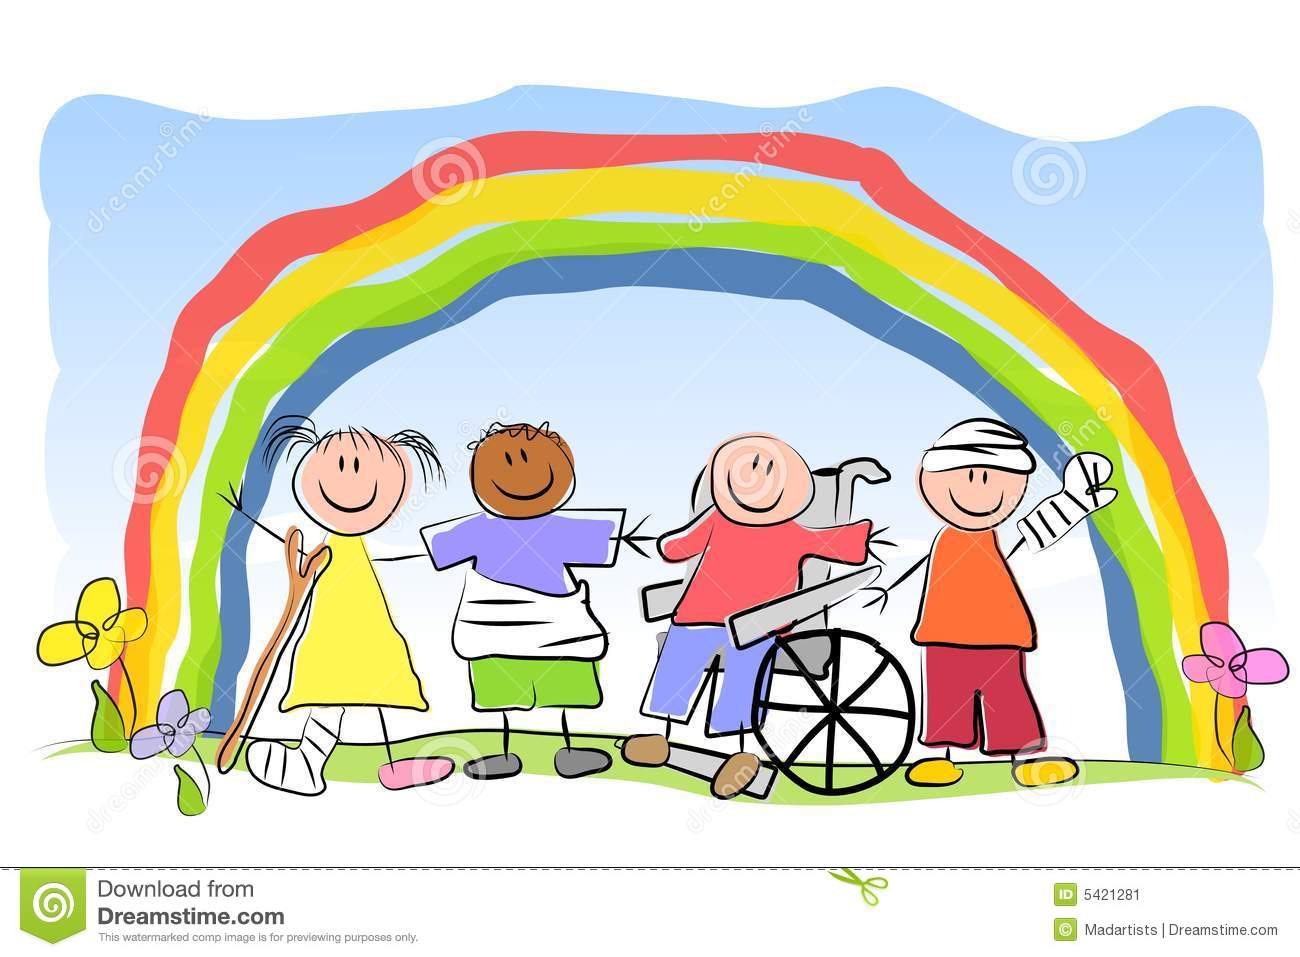 Clip Art Illustration Featuring A Group Of Kids Standing And Smiling